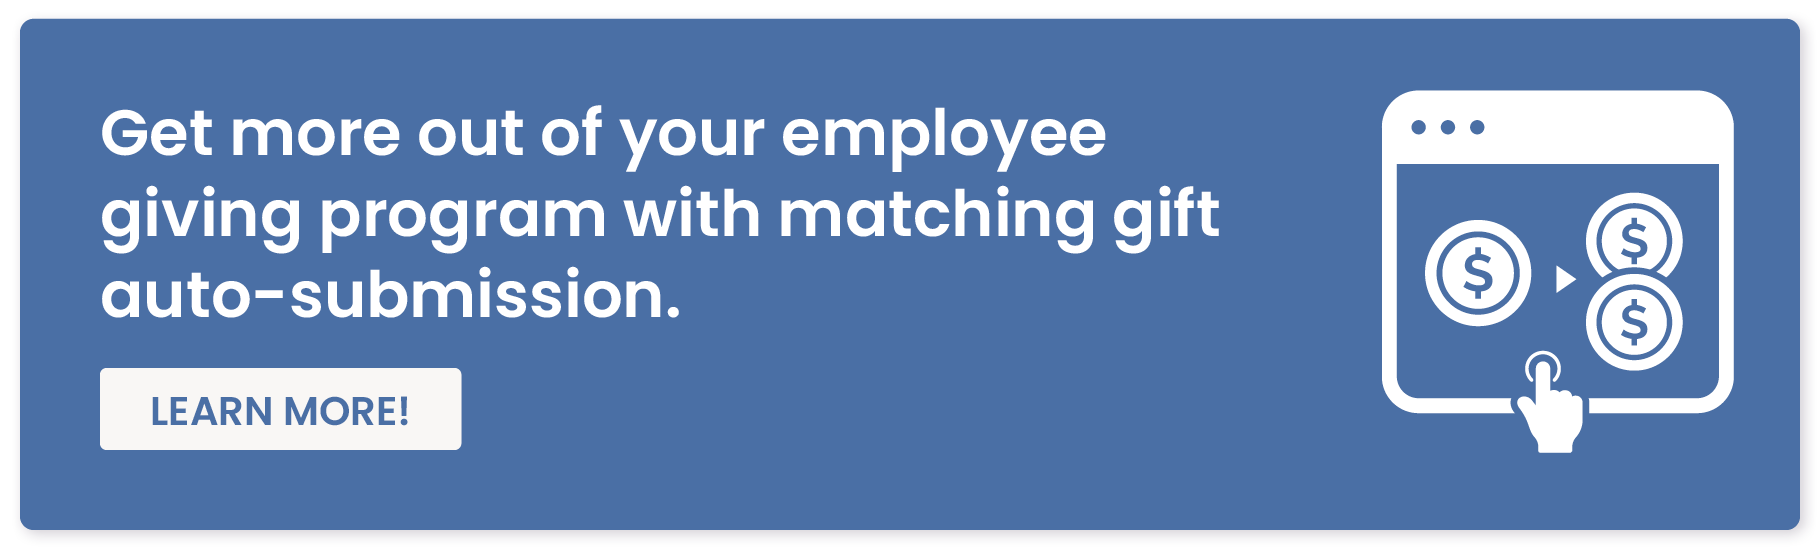 Get more out of your employee giving program with matching gift auto-submission. Learn more!